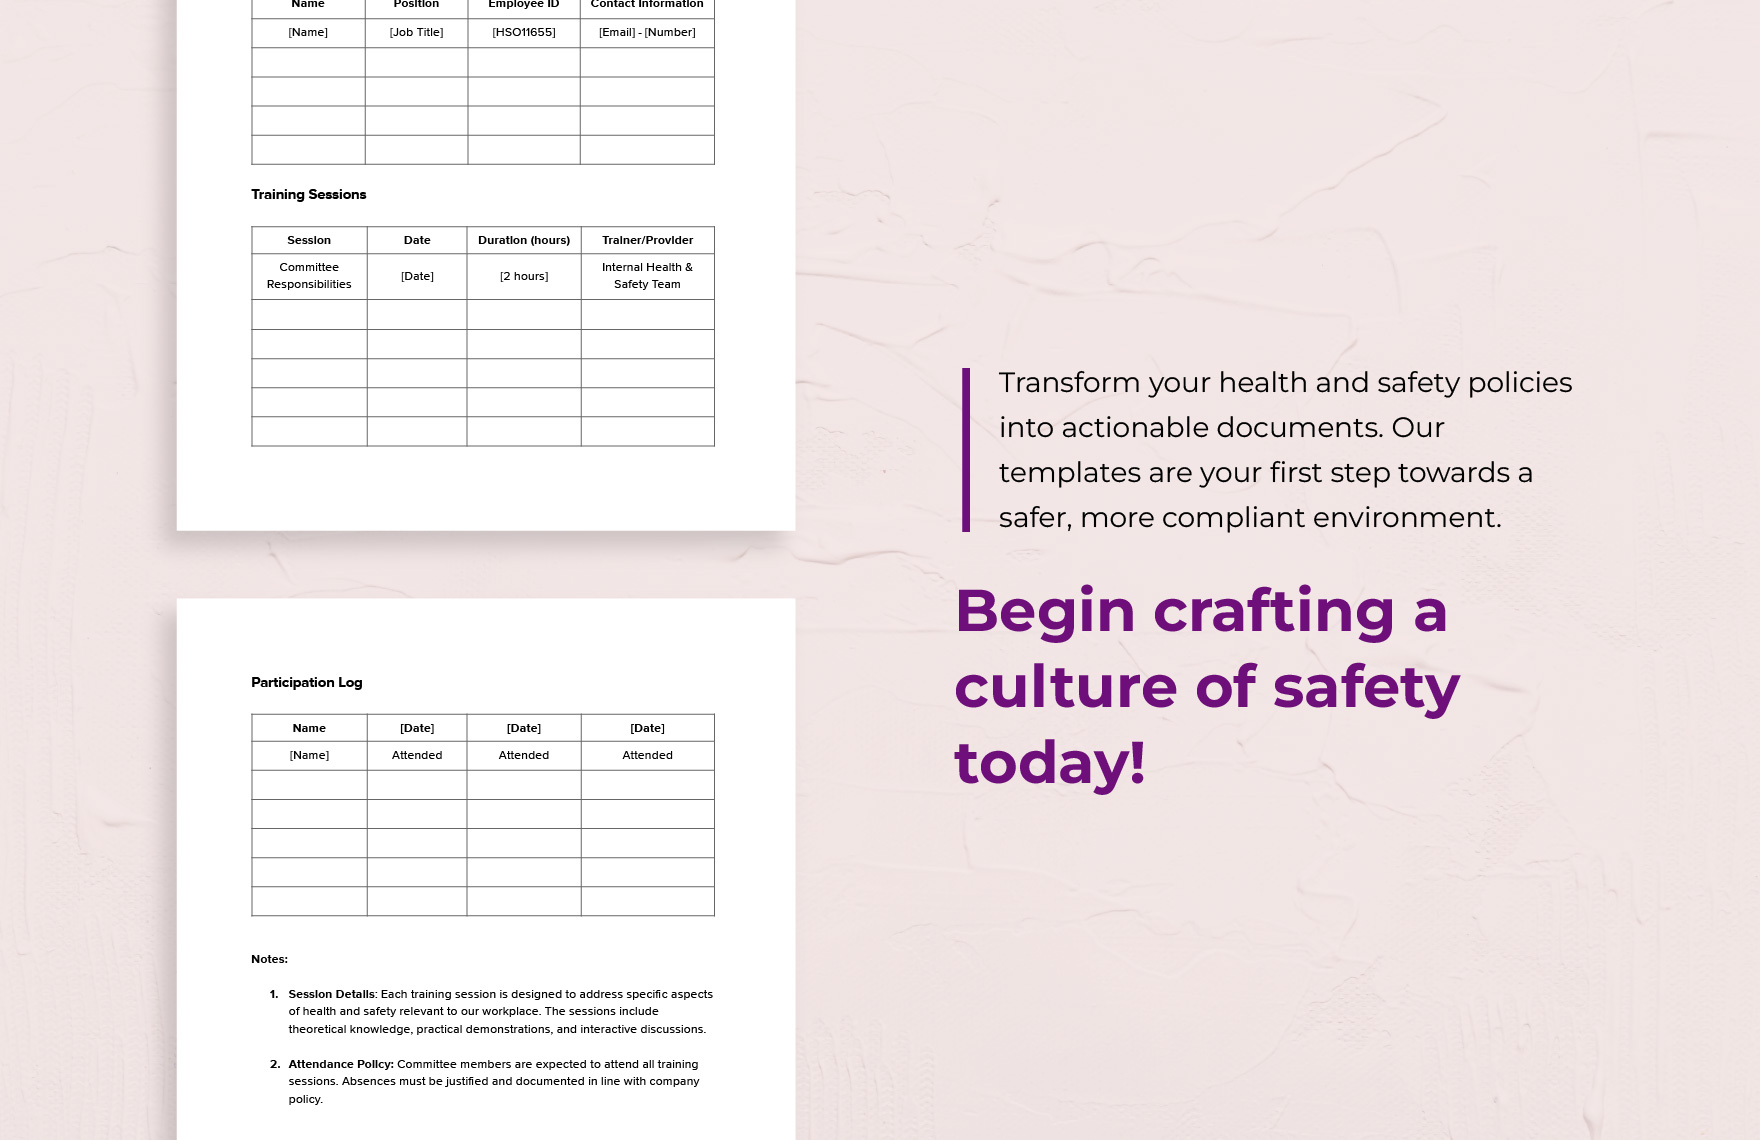 Health & Safety Committee Training Record Template